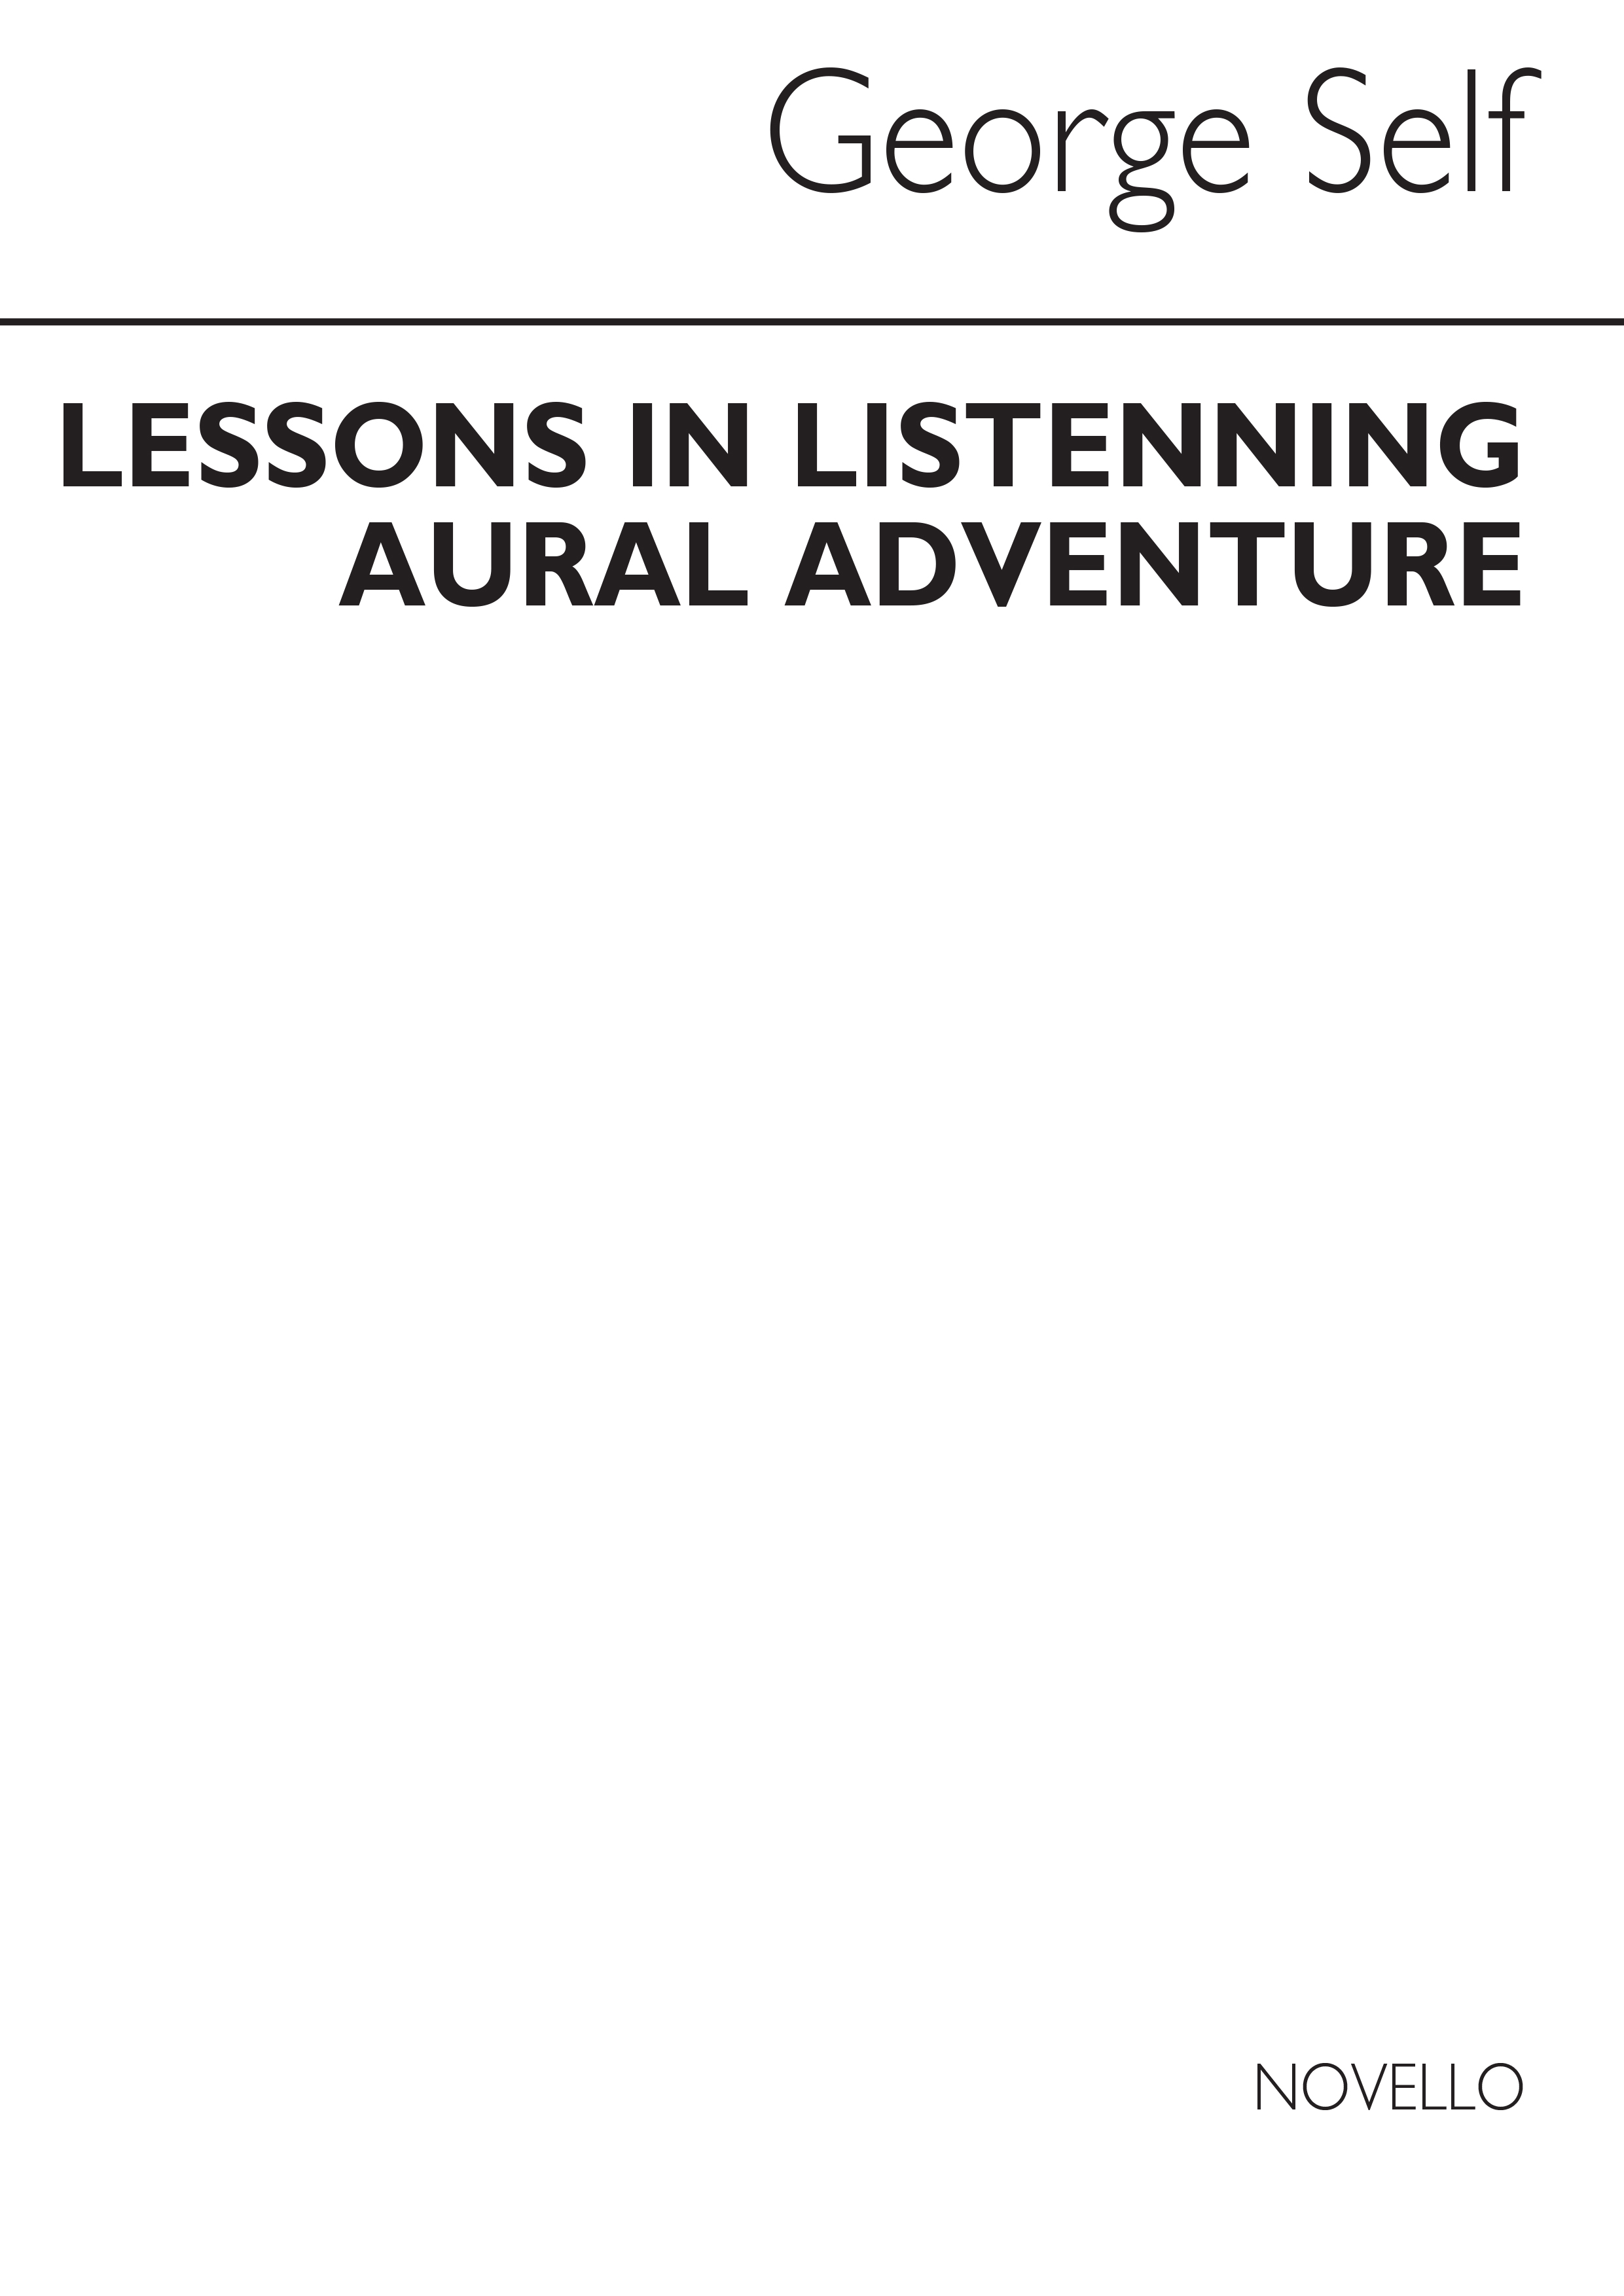 Self: Aural Adventure Pupil's Book: Theory